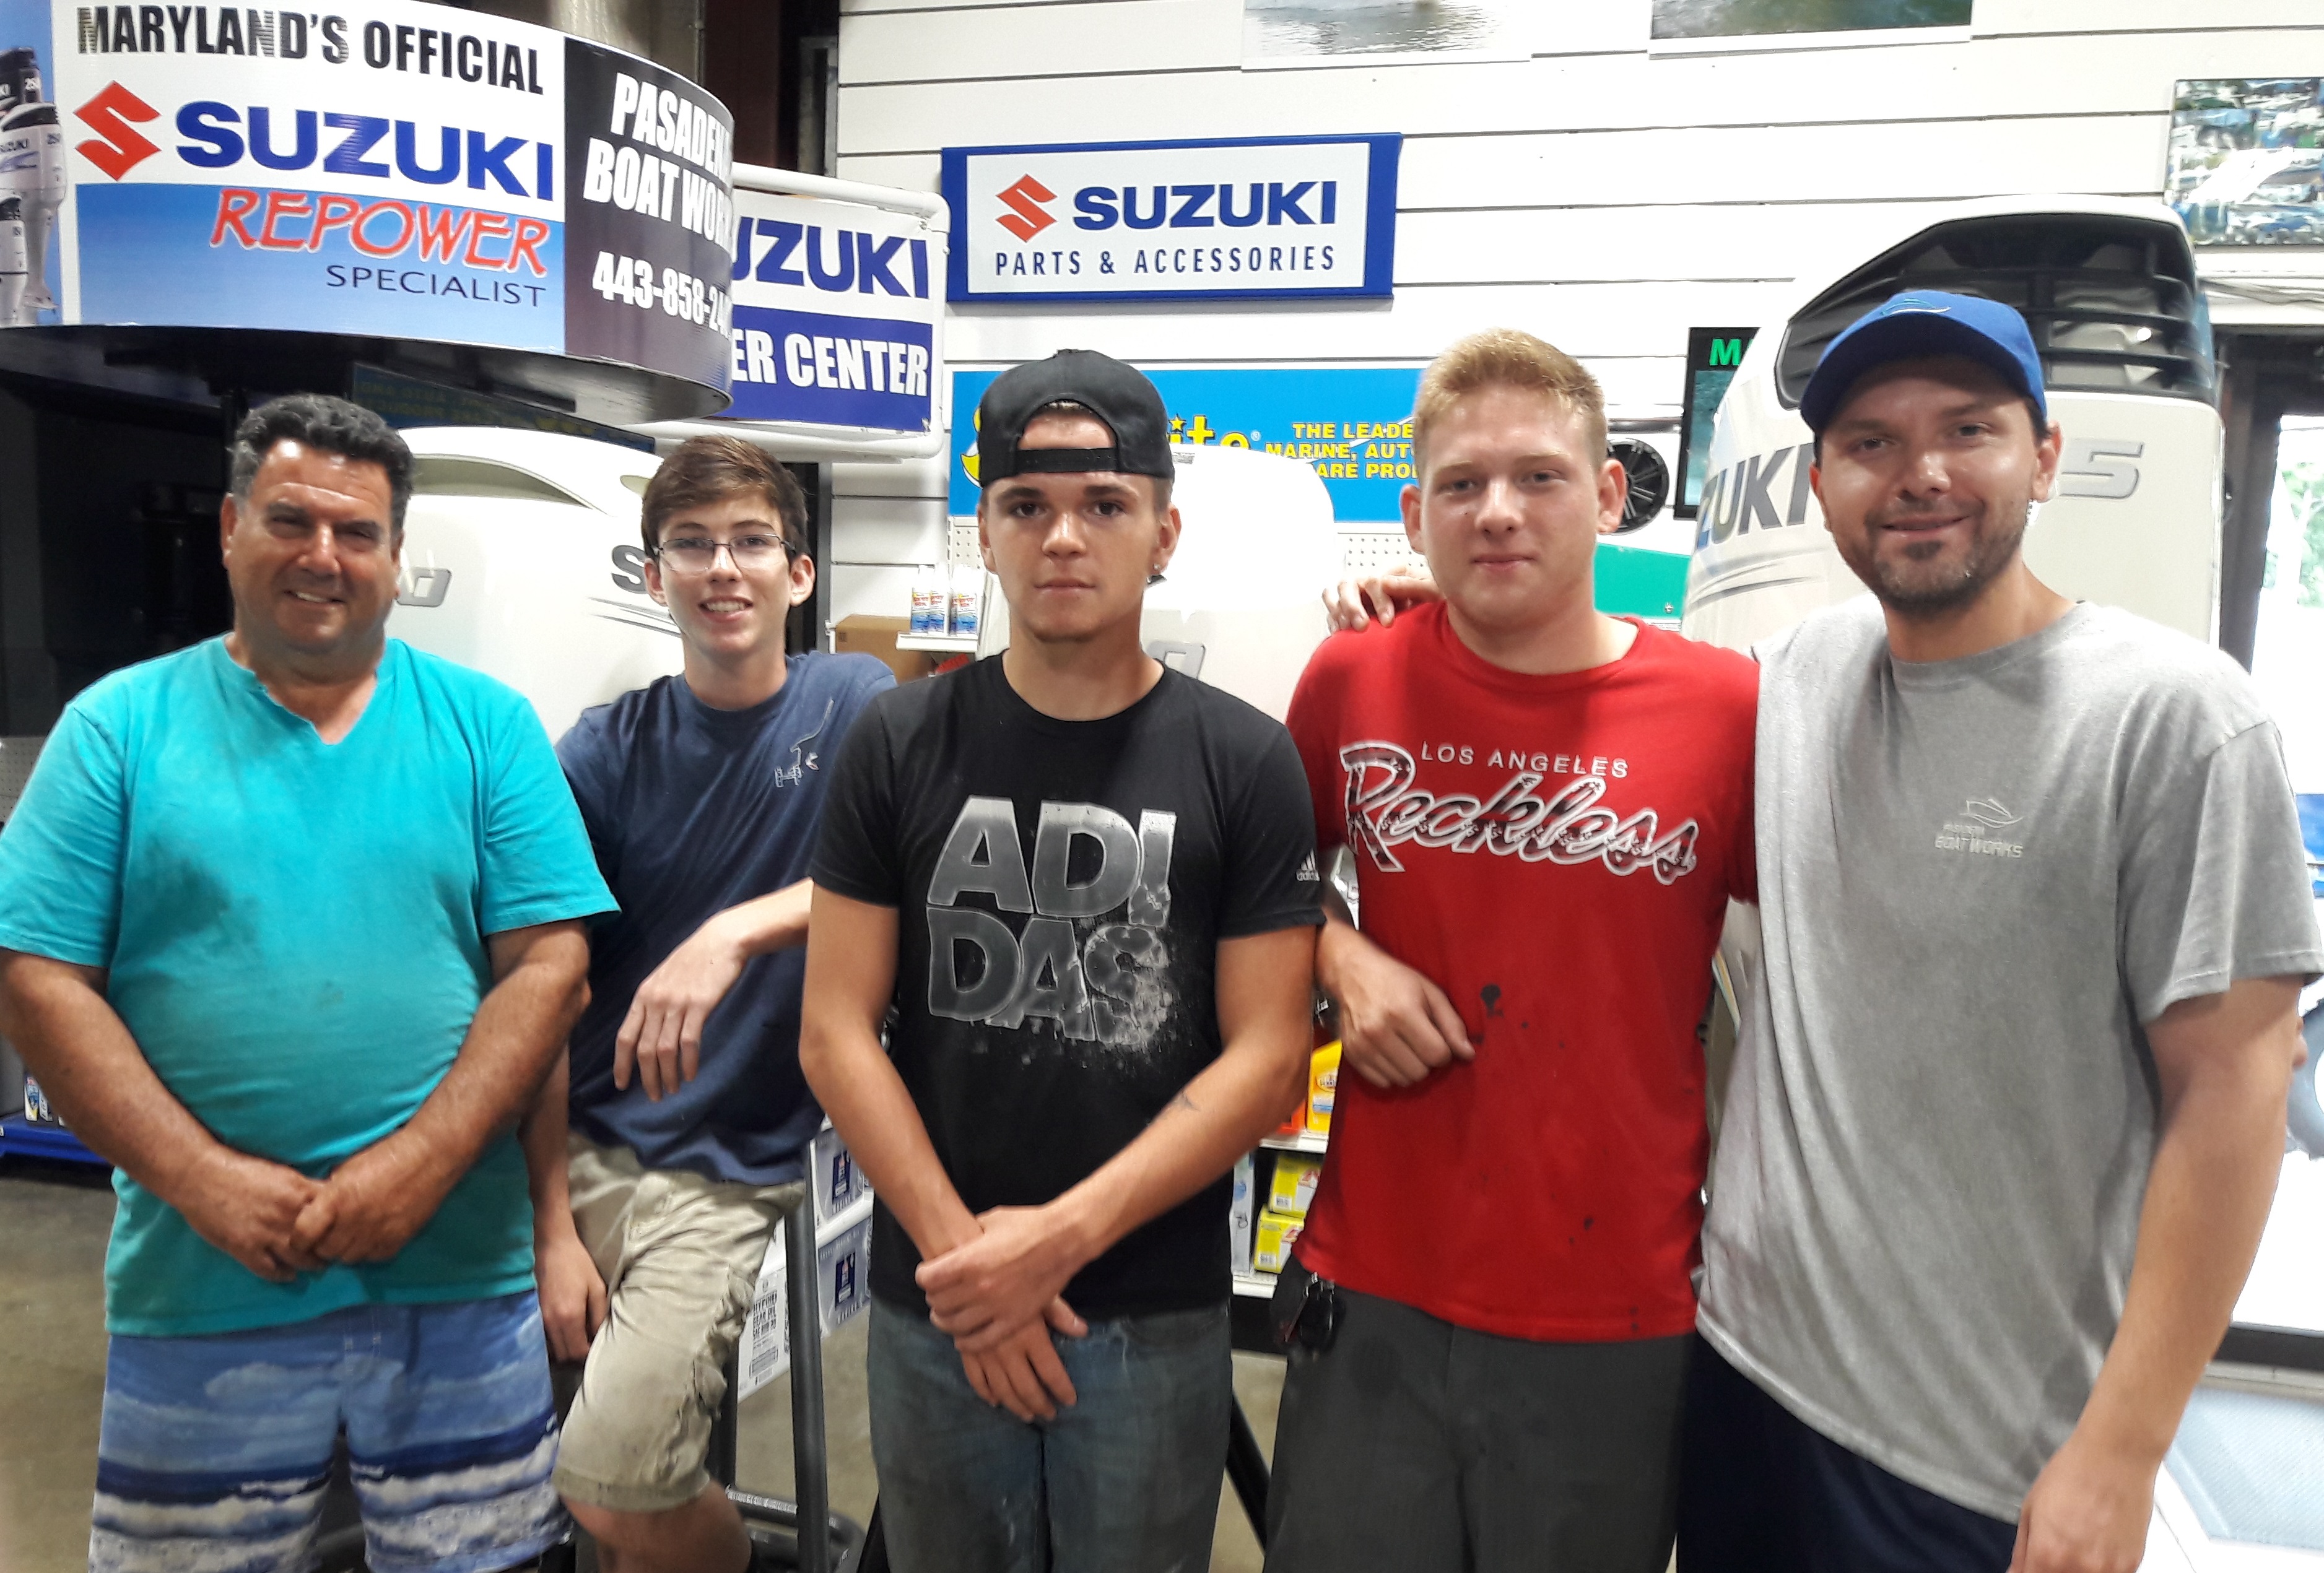 Dawson Combs (second from the left), Dylan Barclay (center), and Garrett Tate (second from the right) with supervisor Mario (left) and Pasadena Boat Works Manager, Nick Doetsch (right).